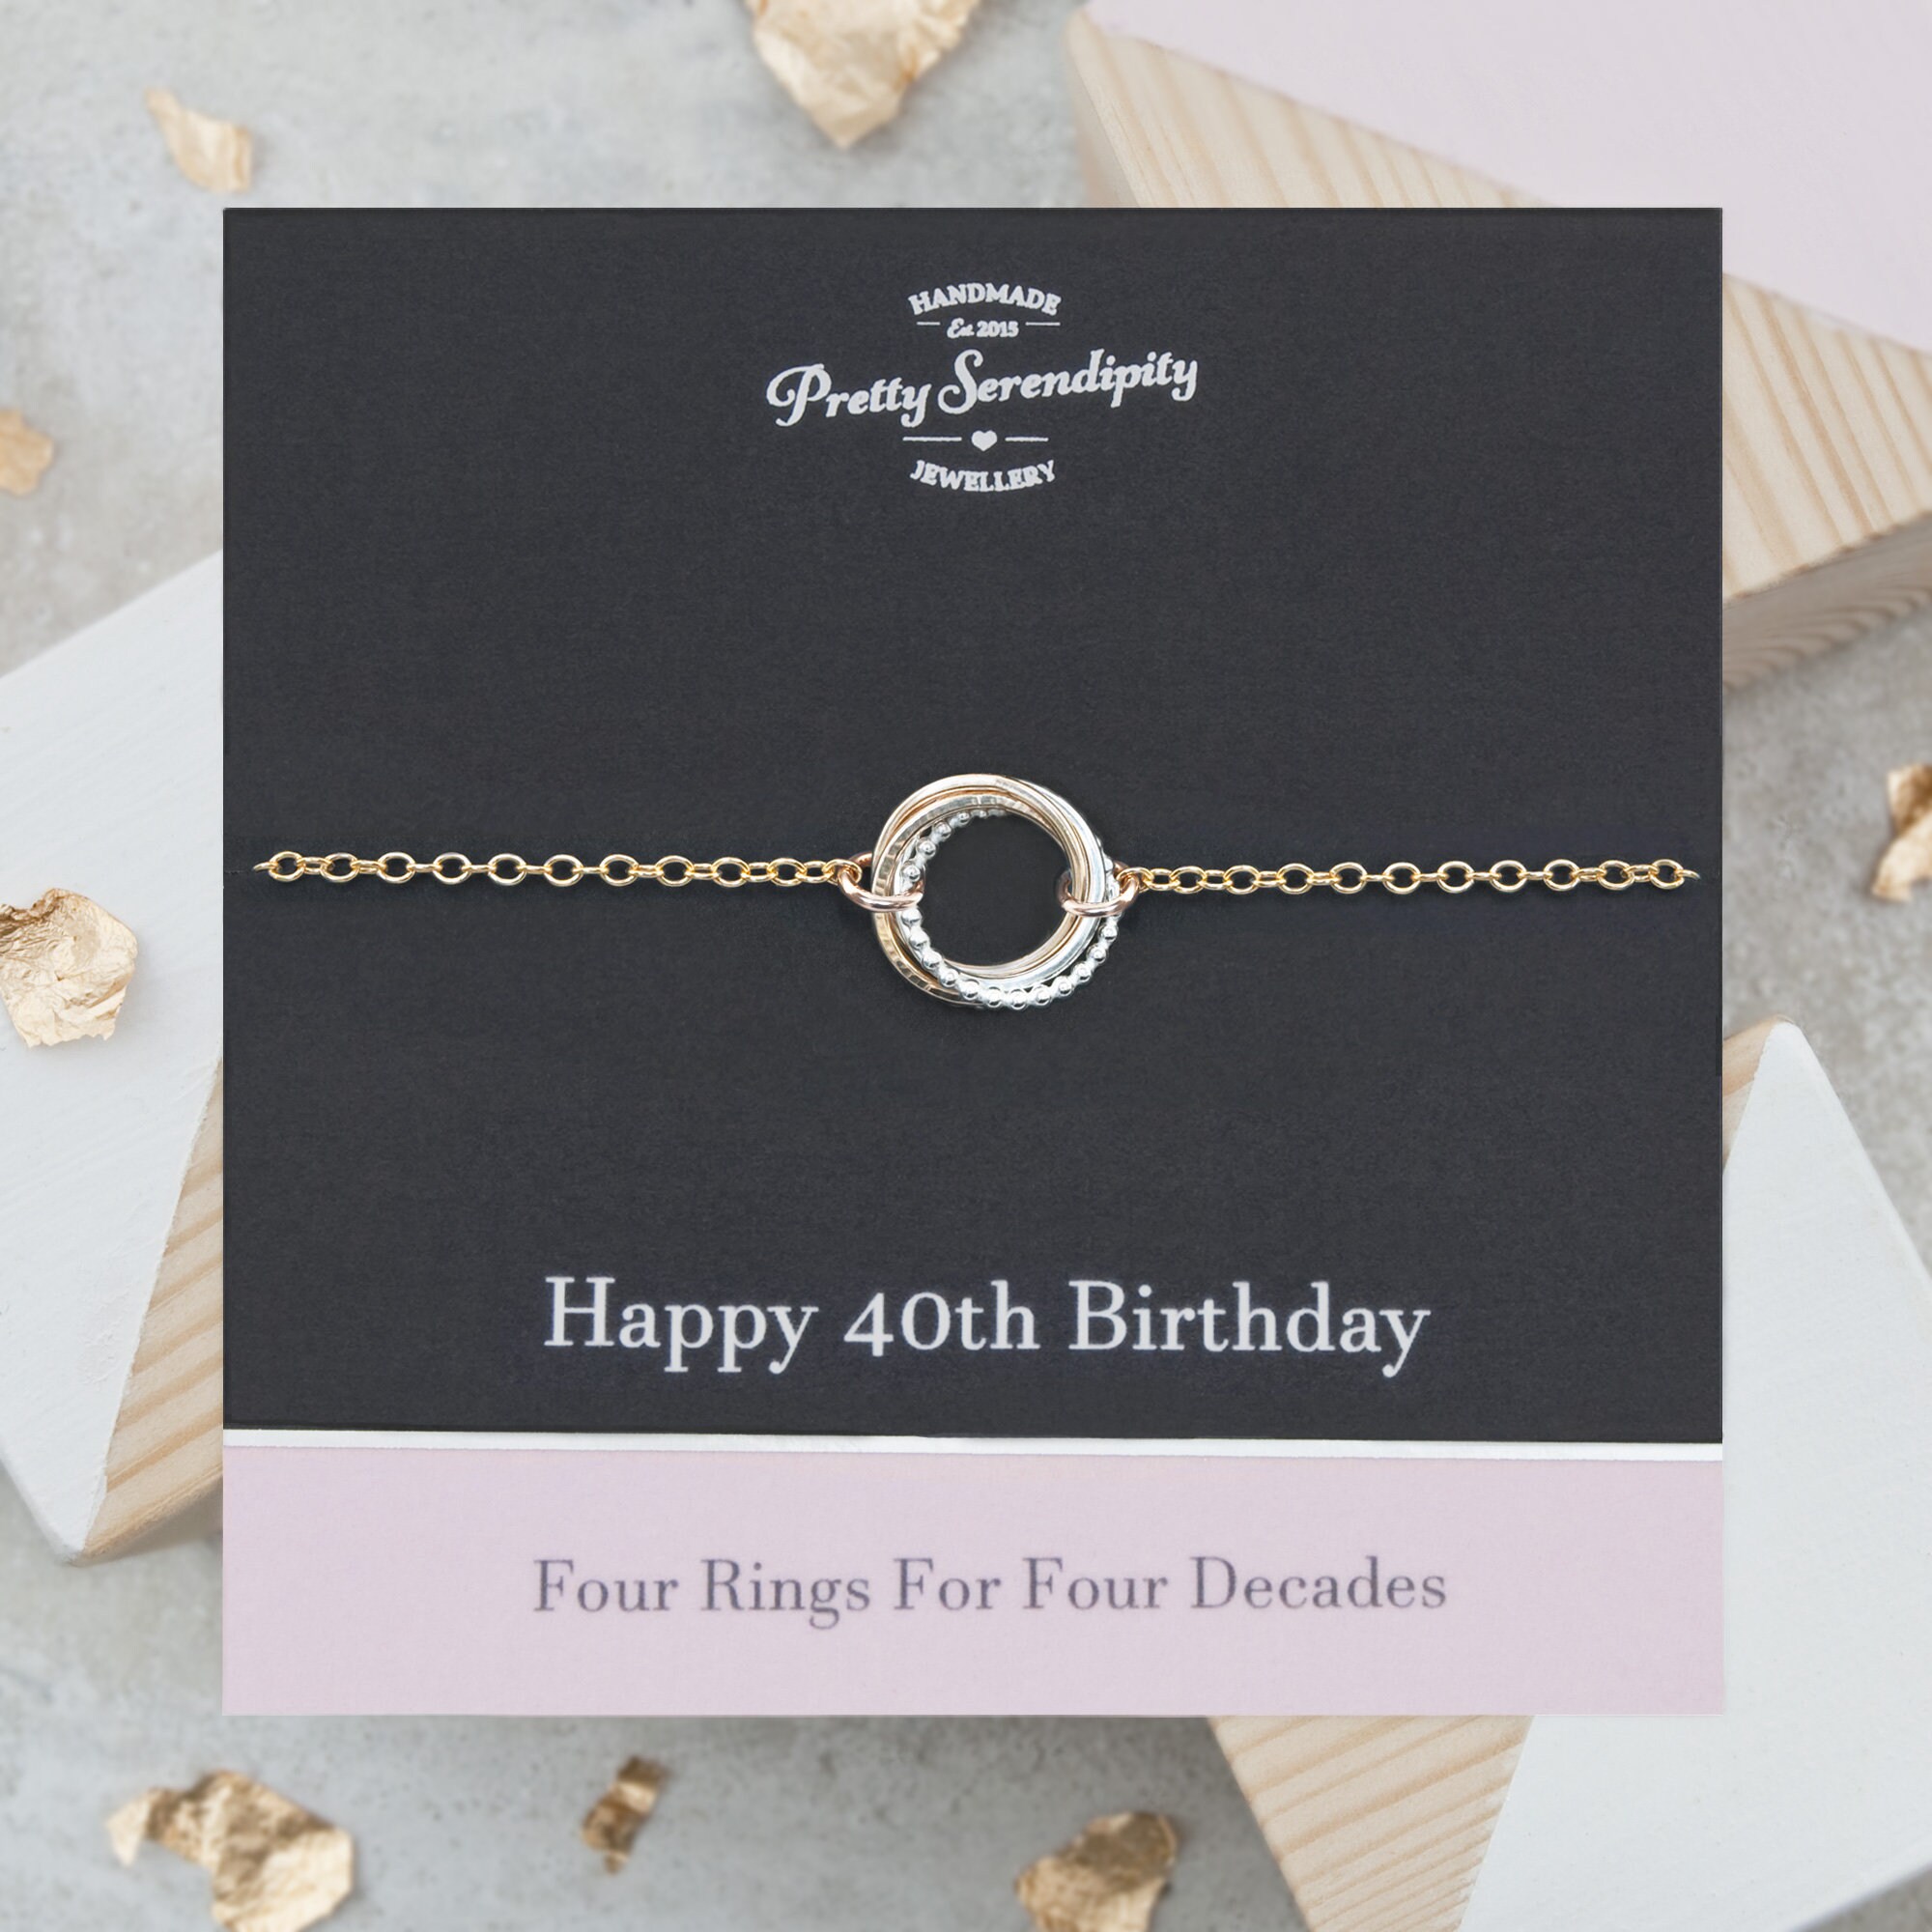 40Th Birthday Mixed Metal Bracelet - 4 Rings For Decades, Gifts Her, Silver & 14Ct Gold Fill